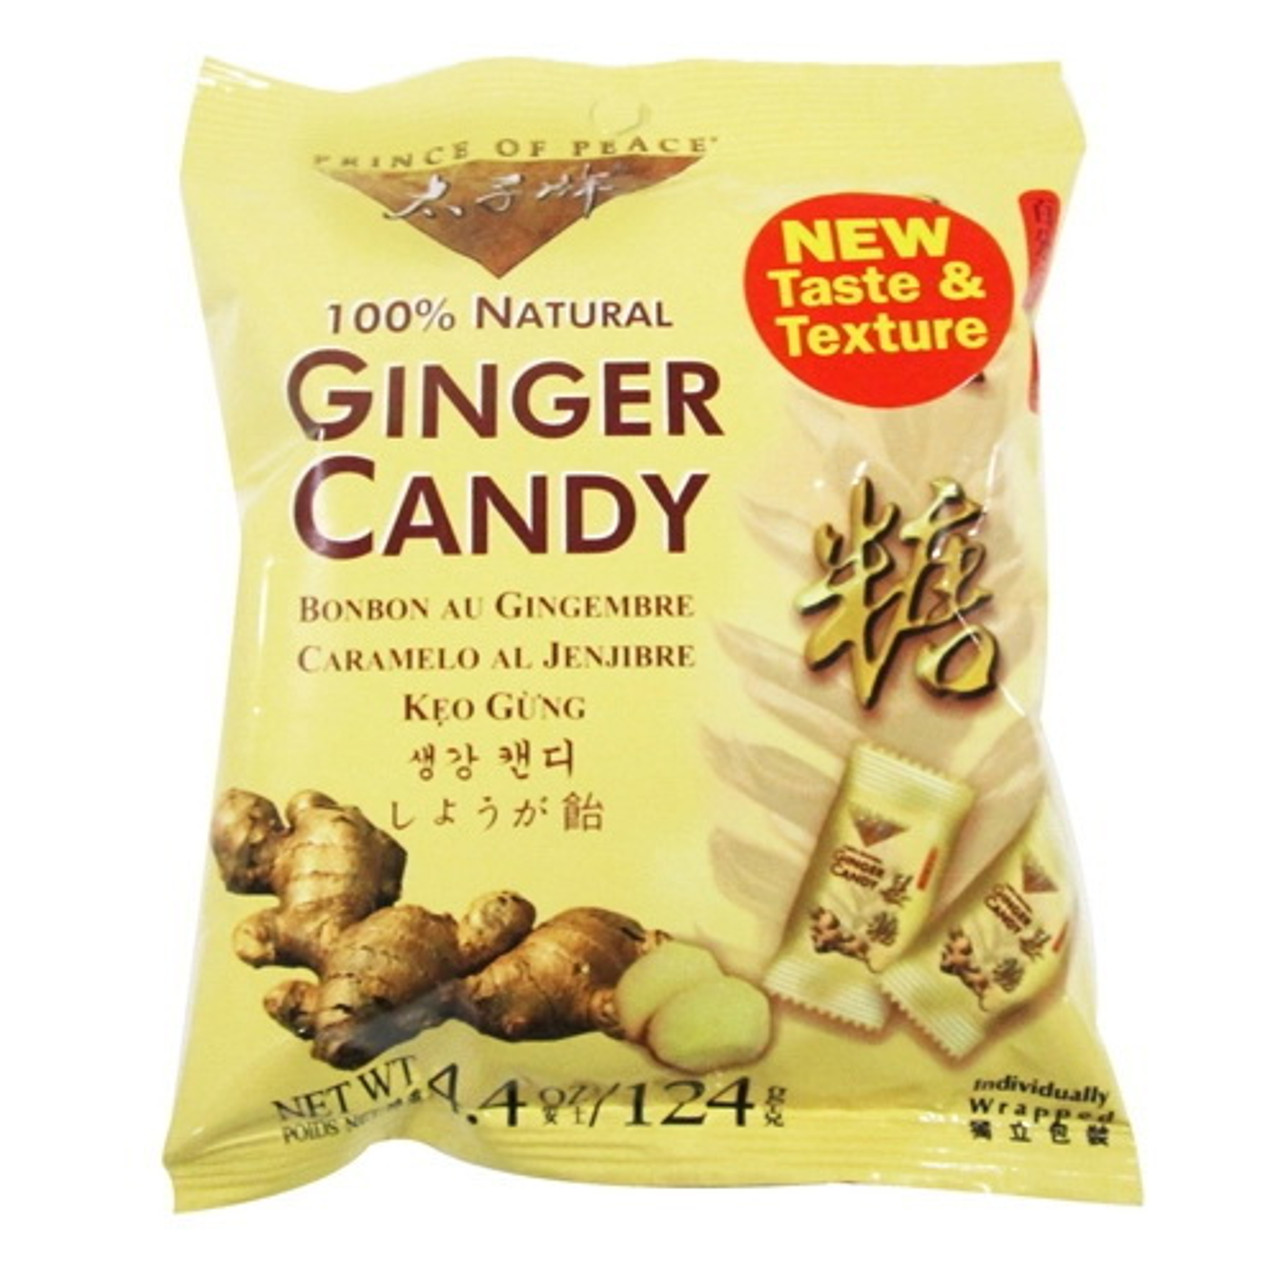 Prince Of Peace Ginger Candy Chews 100 Natural 44 Oz 5360